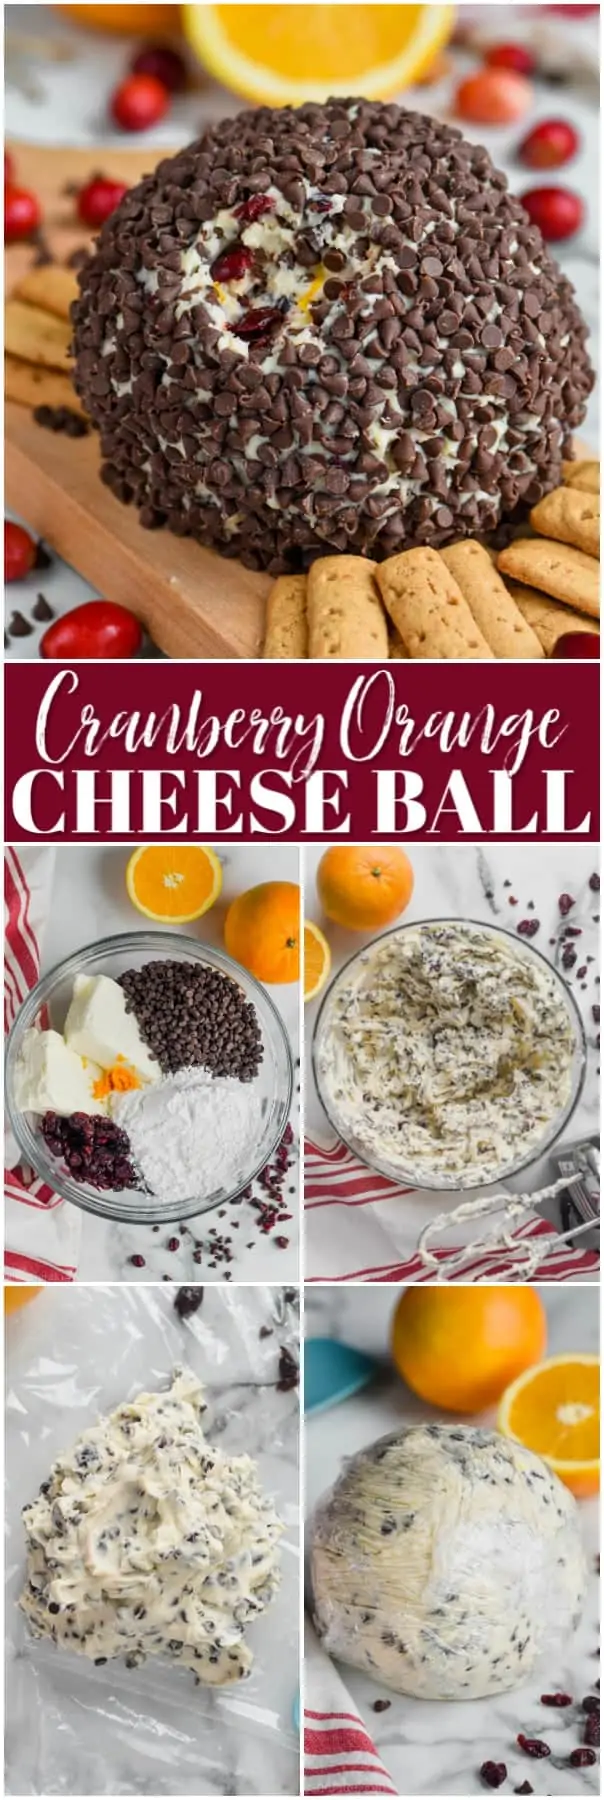 chocolate chip coated cranberry orange cheese ball recipe on a cutting board with crackers